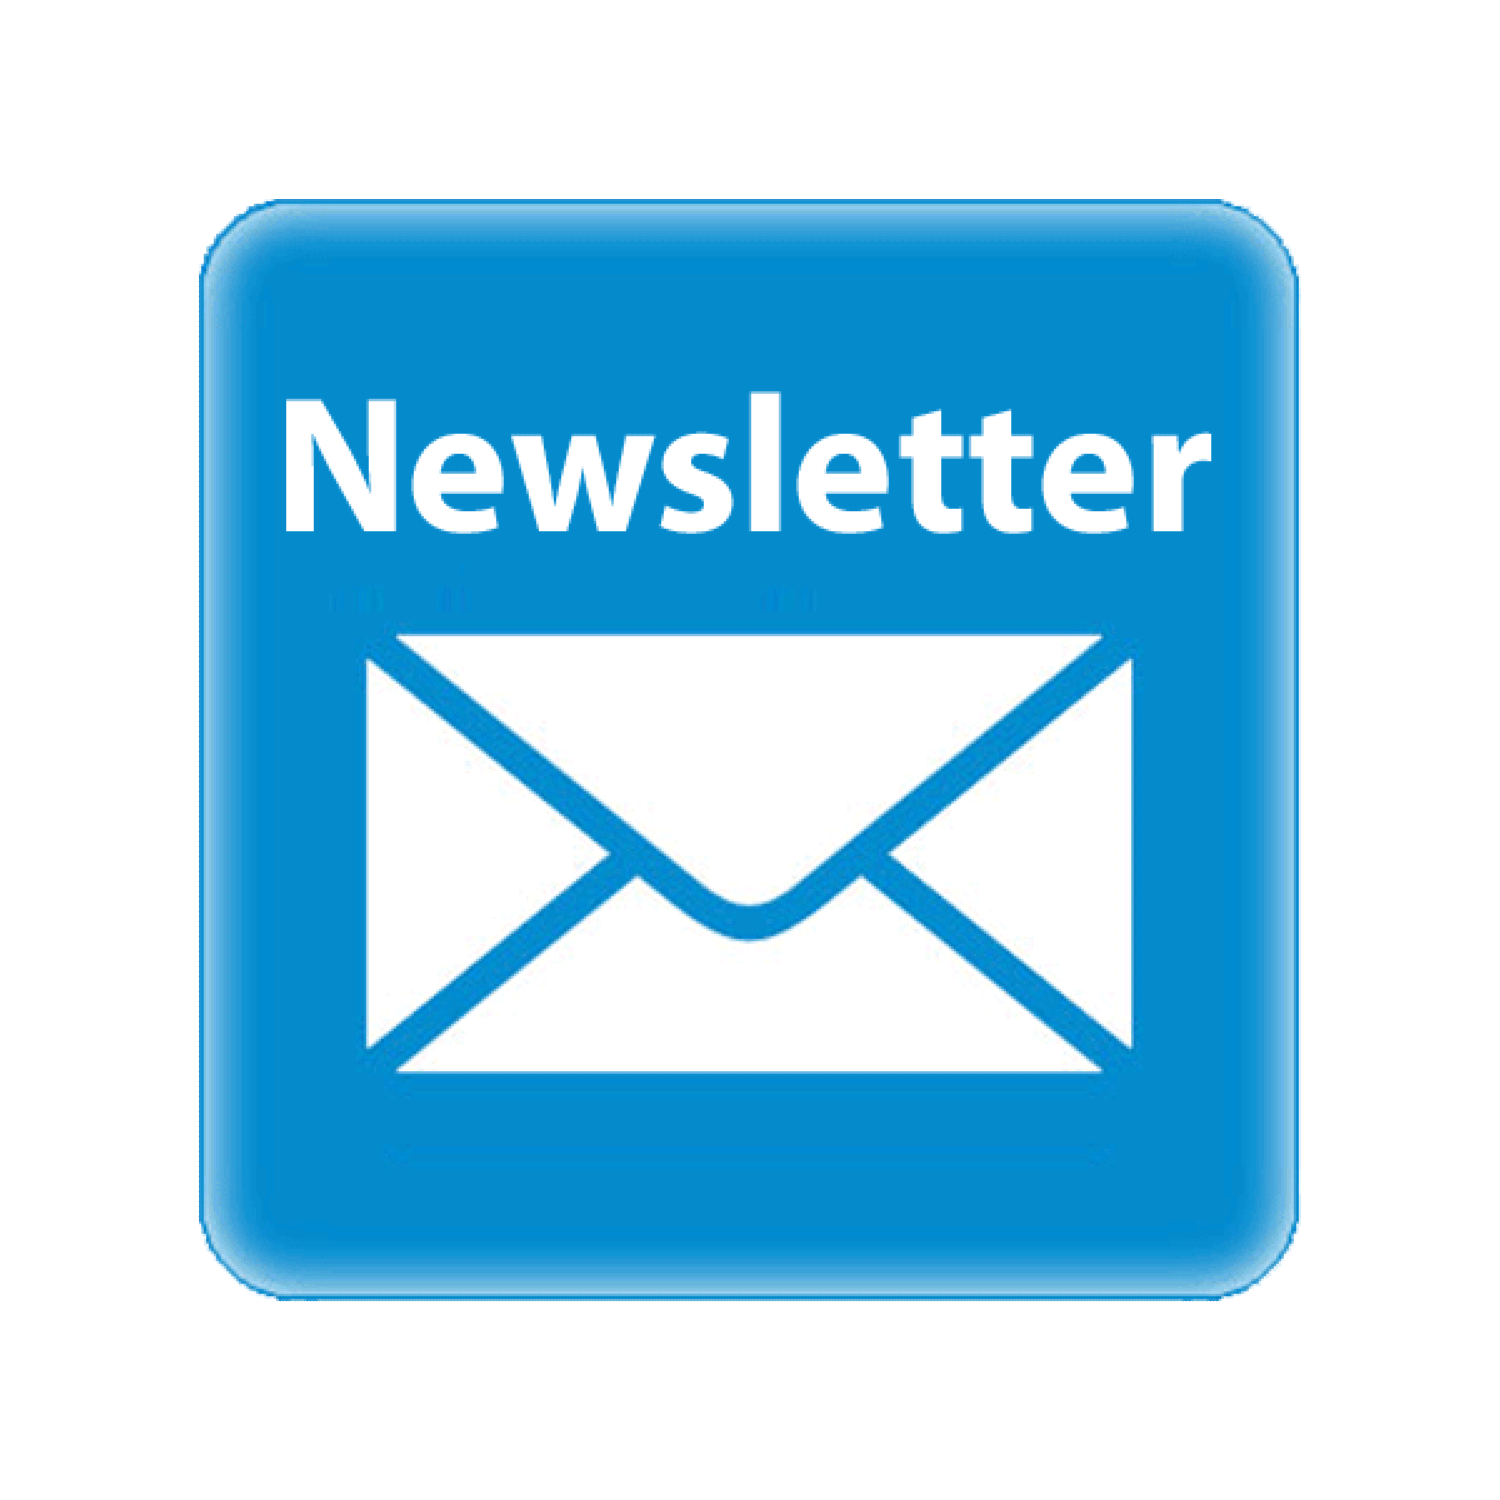 SISA's March newsletter is out now!